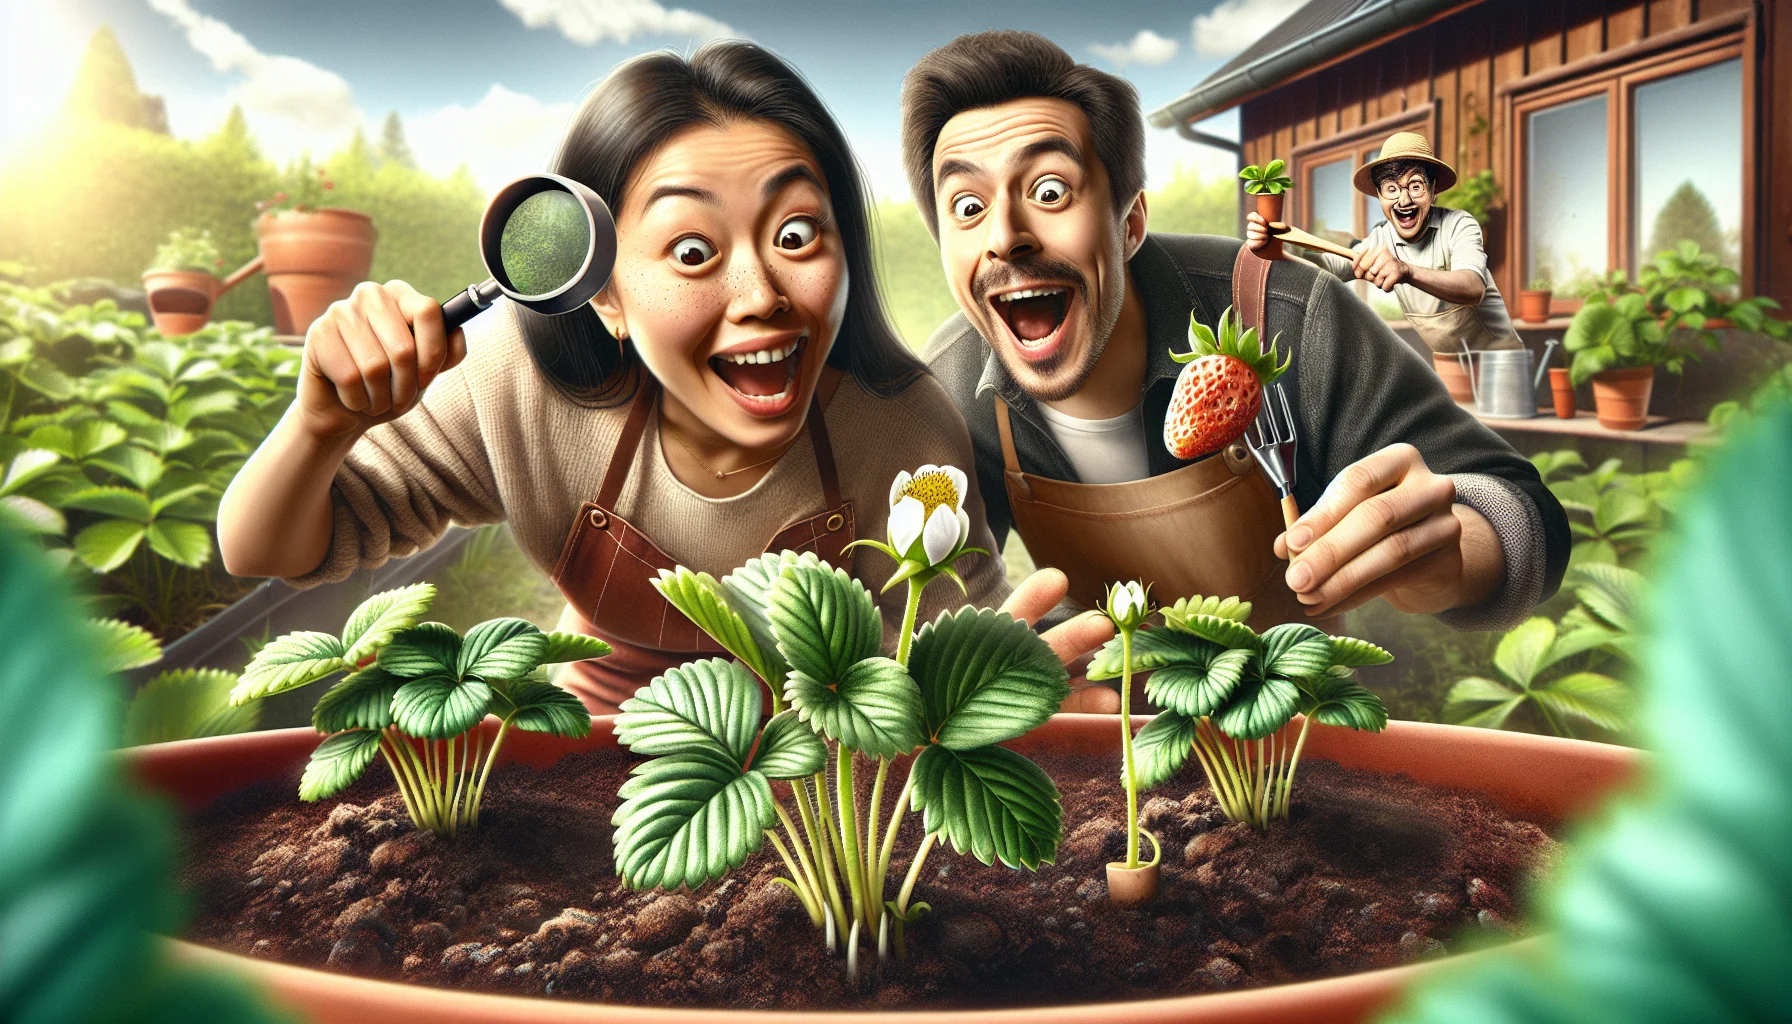 A realistic and amusing scene of gardening at home. The main focus of the image is a Hispanic woman and an Asian man, both in their gardening attire, cheerfully engaged in the process of growing strawberries from seeds. The luscious green strawberry plants are gradually sprouting from the rich, dark soil in clay pots, their tiny white flowers just beginning to bloom. The woman is humorously holding a magnifying glass over the budding strawberries, her eyes wide in feigned surprise, while the man is comically thumping a tiny drum as if encouraging the seeds to grow. The background includes a sunny day and a typical home garden ambiance to inspire people for gardening enjoyment.